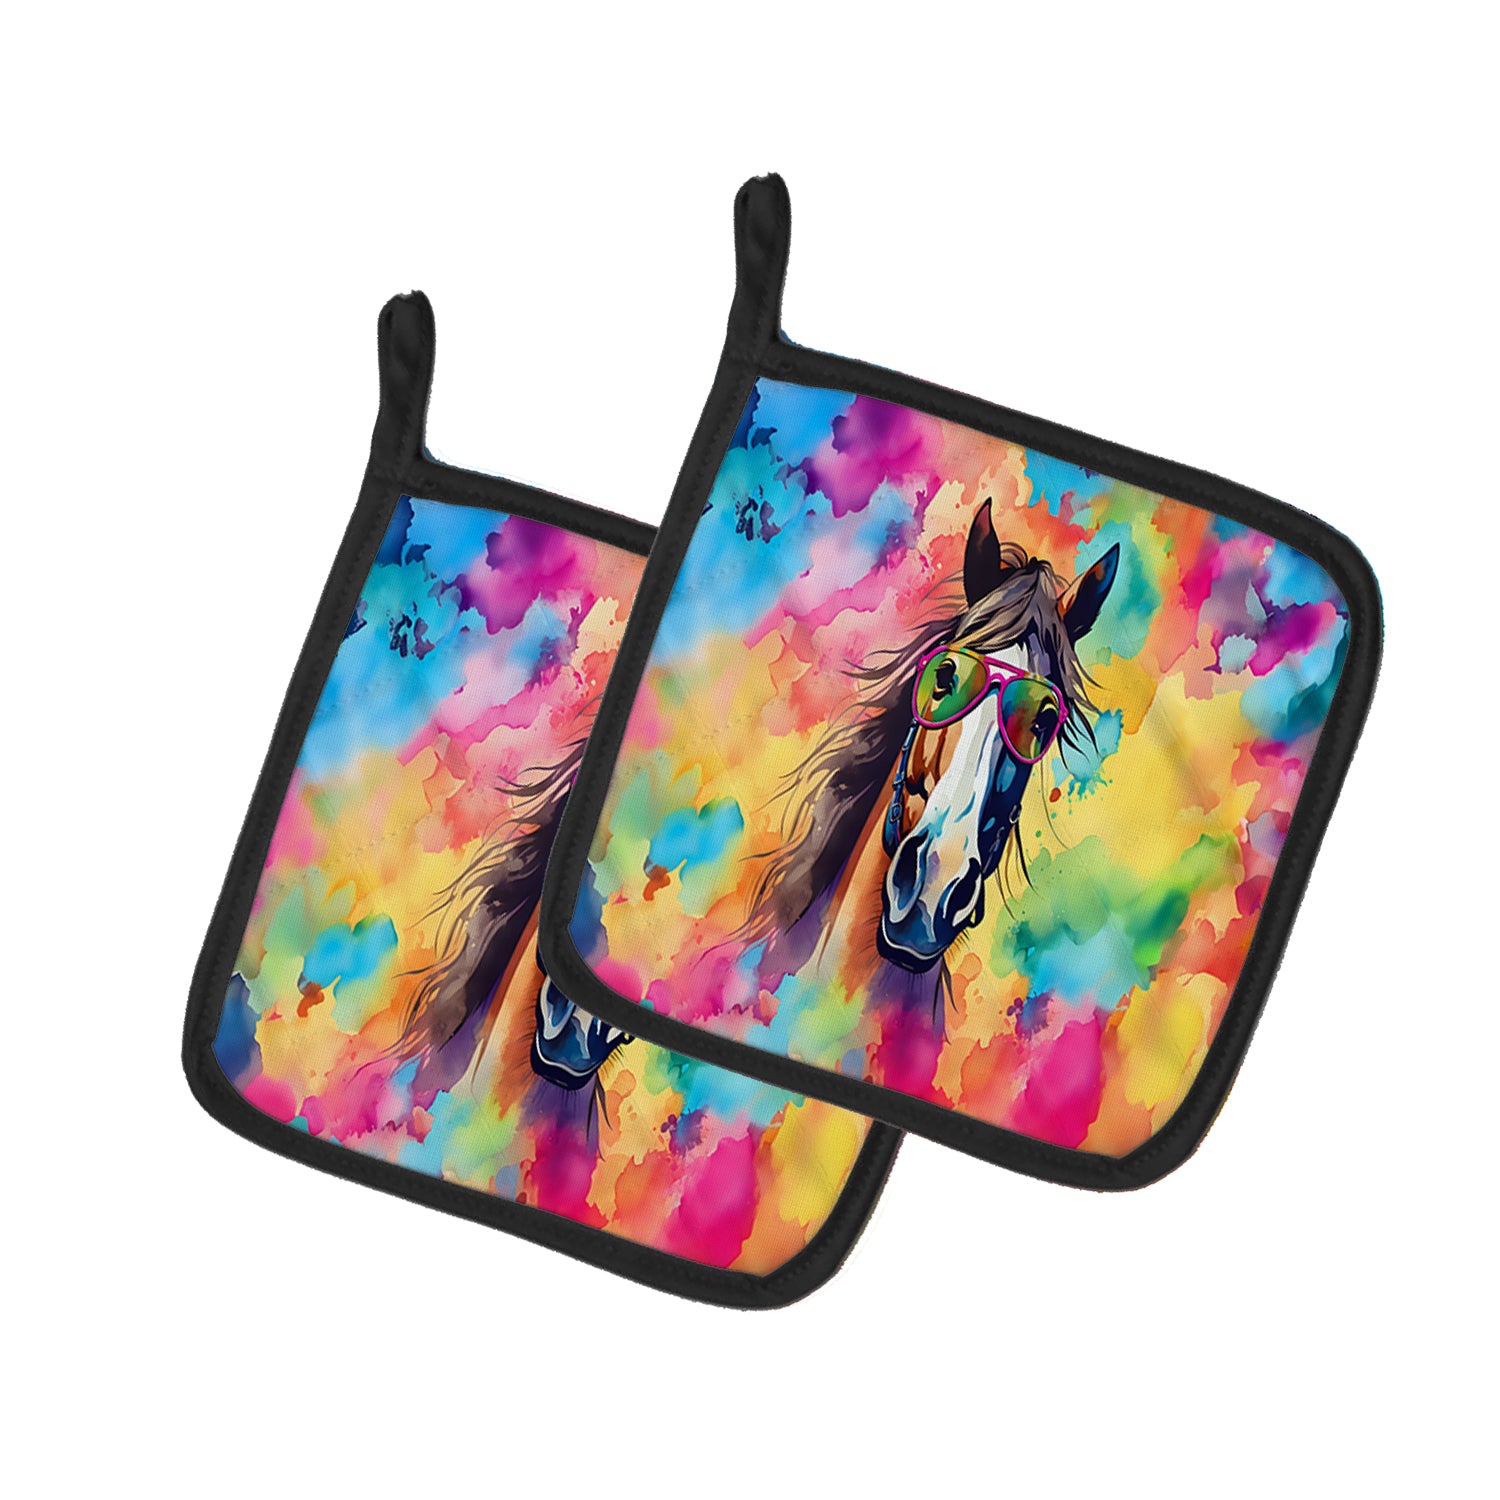 Buy this Hippie Animal Horse Pair of Pot Holders